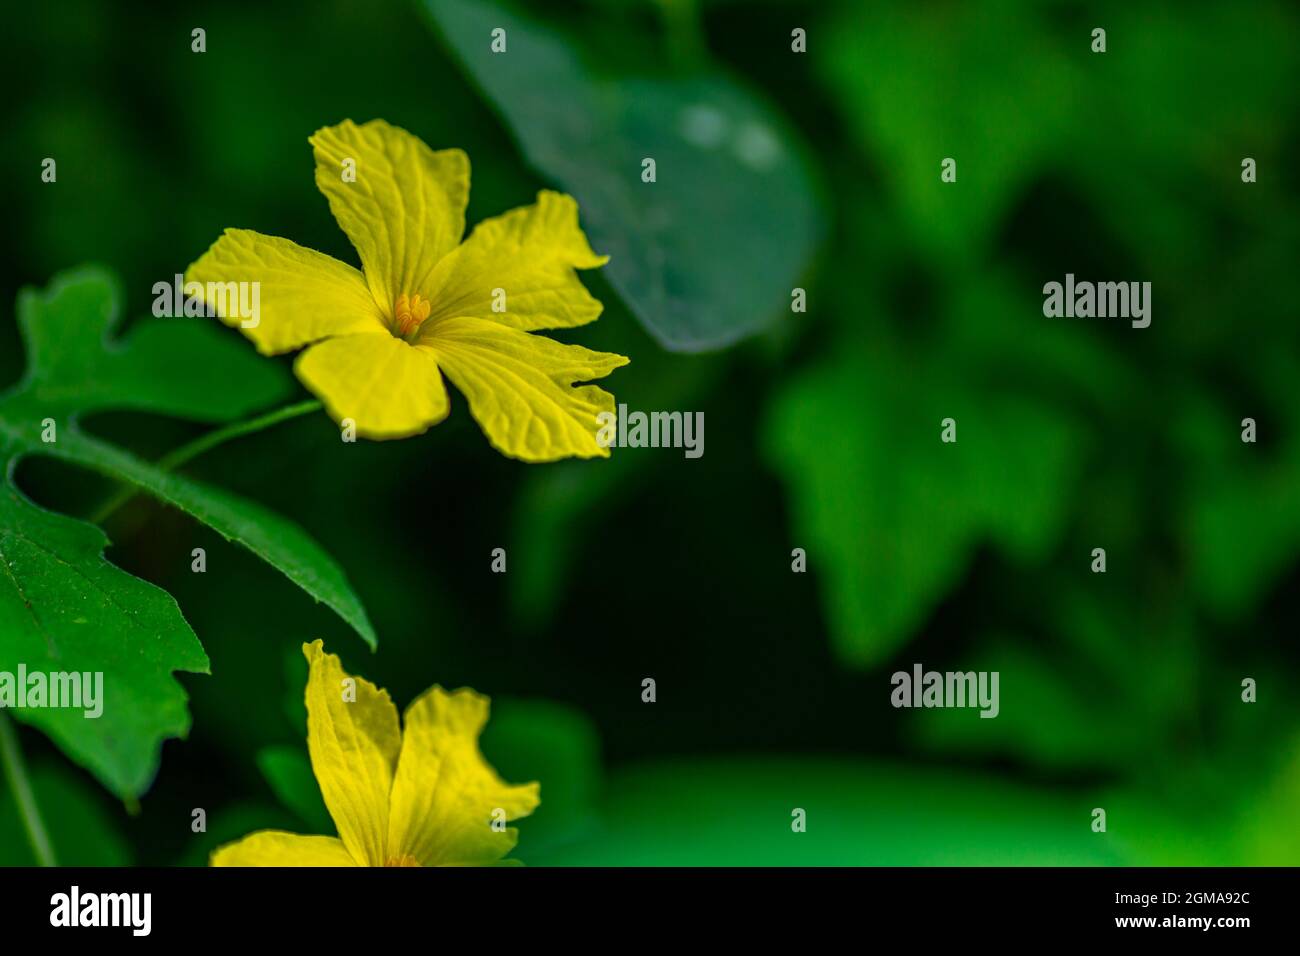 Yellow forest bitter melon flower with green foliage background, nature concept Stock Photo